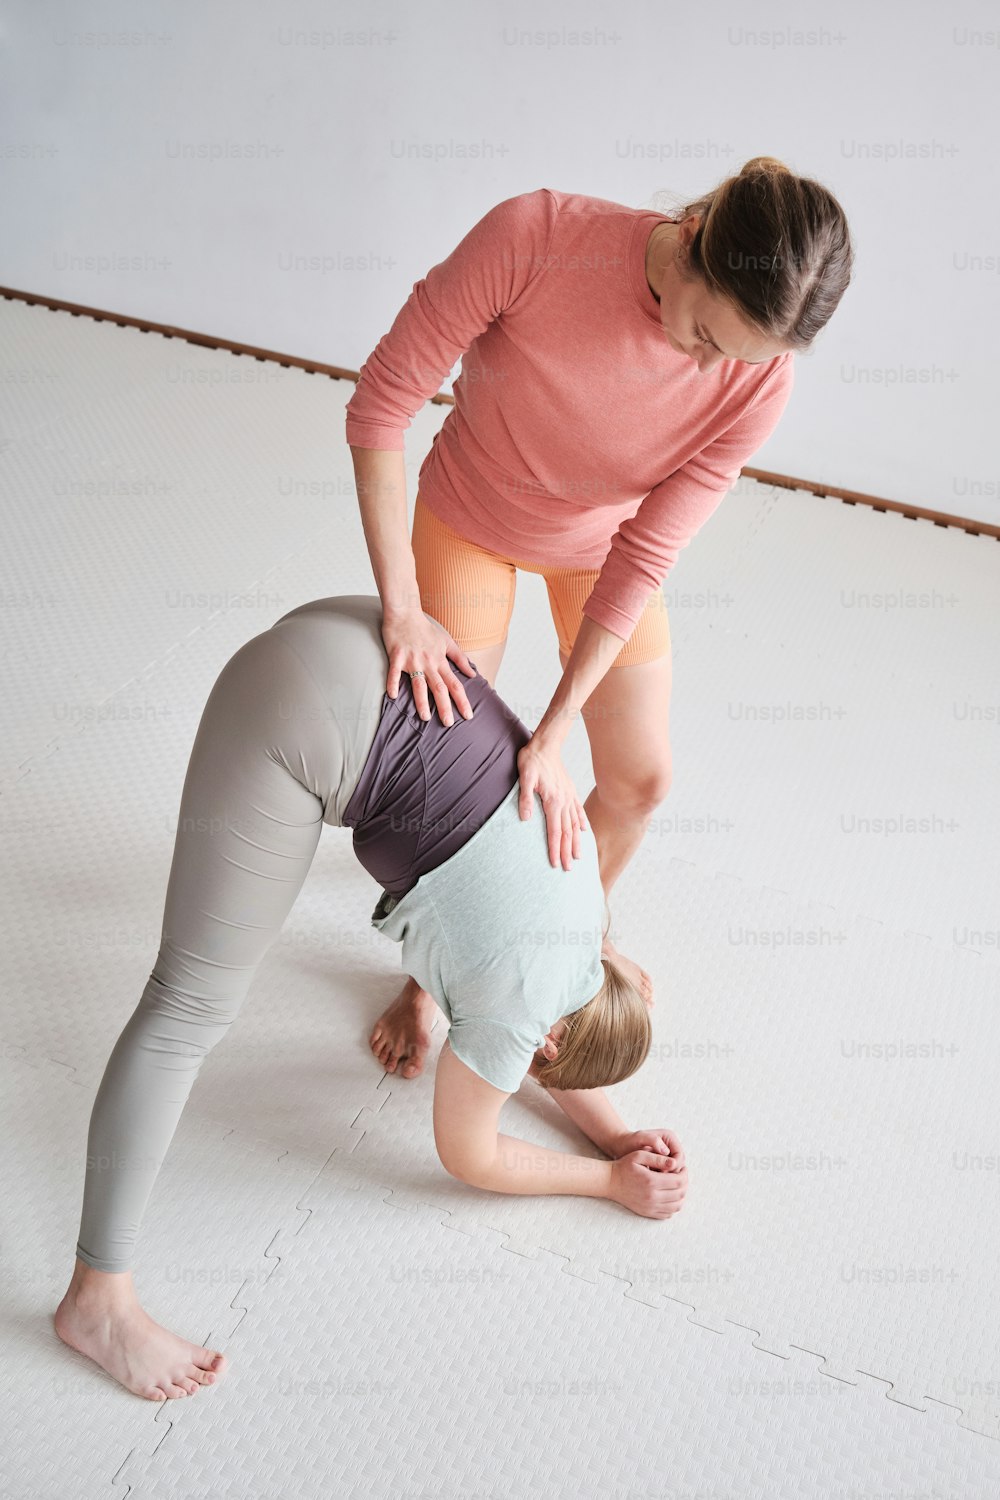 a woman is doing a handstand on a mat